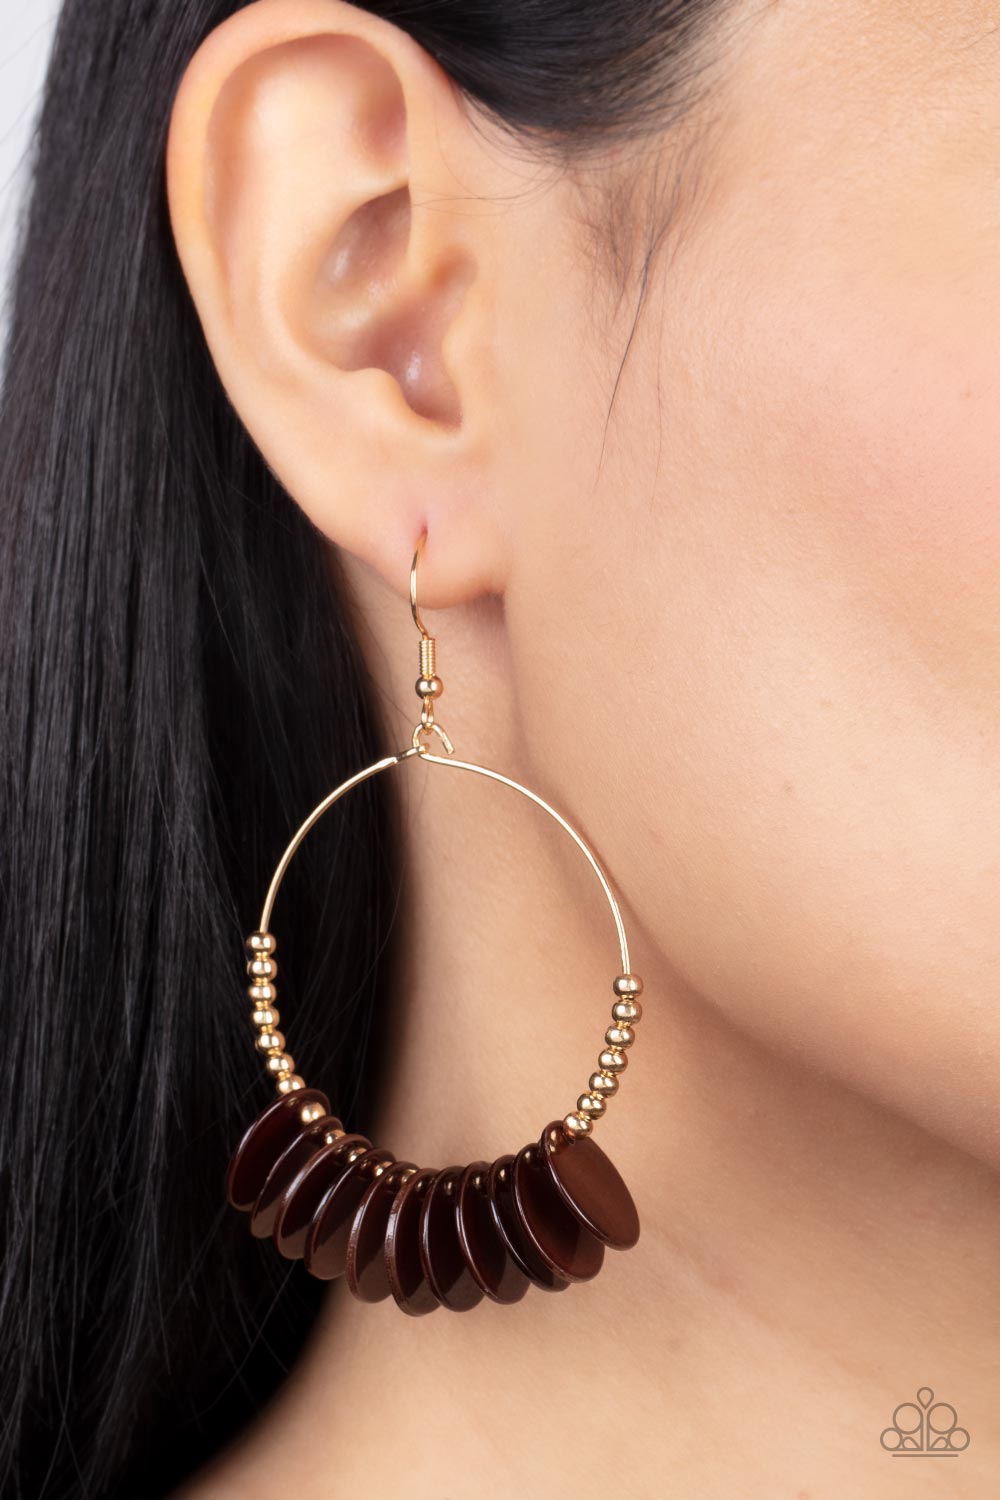 Caribbean Cocktail - Brown Shell-Like Earrings shiny brown shell-like discs alternate with dainty gold beads around a petite circular gold wire frame for a touch of Caribbean charisma. Earring attaches to a standard fishhook fitting.  Sold as one pair of earrings.